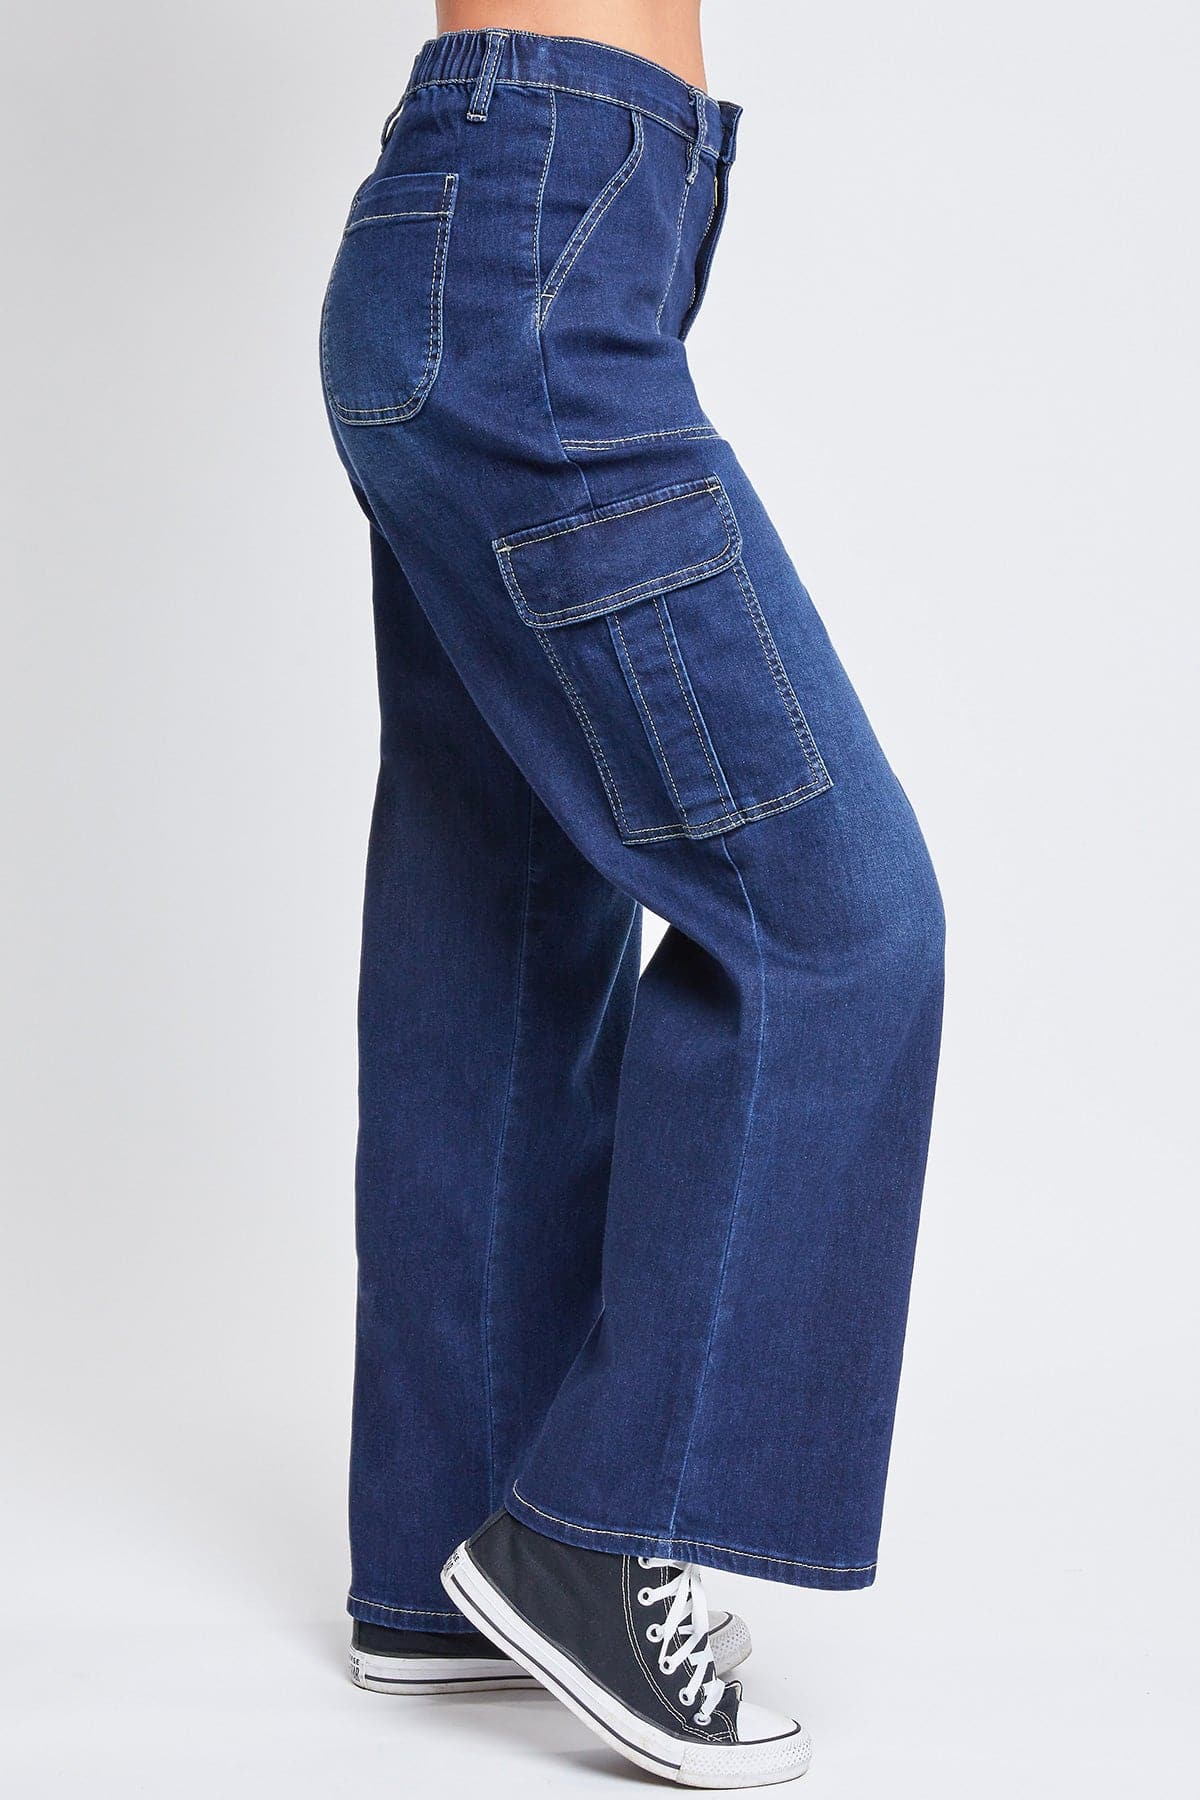 New Denim Semi-Elastic Design Personality All-in-One Cargo Pants Wish Women  Fashion (CFJPFM-017) - China Fashion Pants and Clothing price